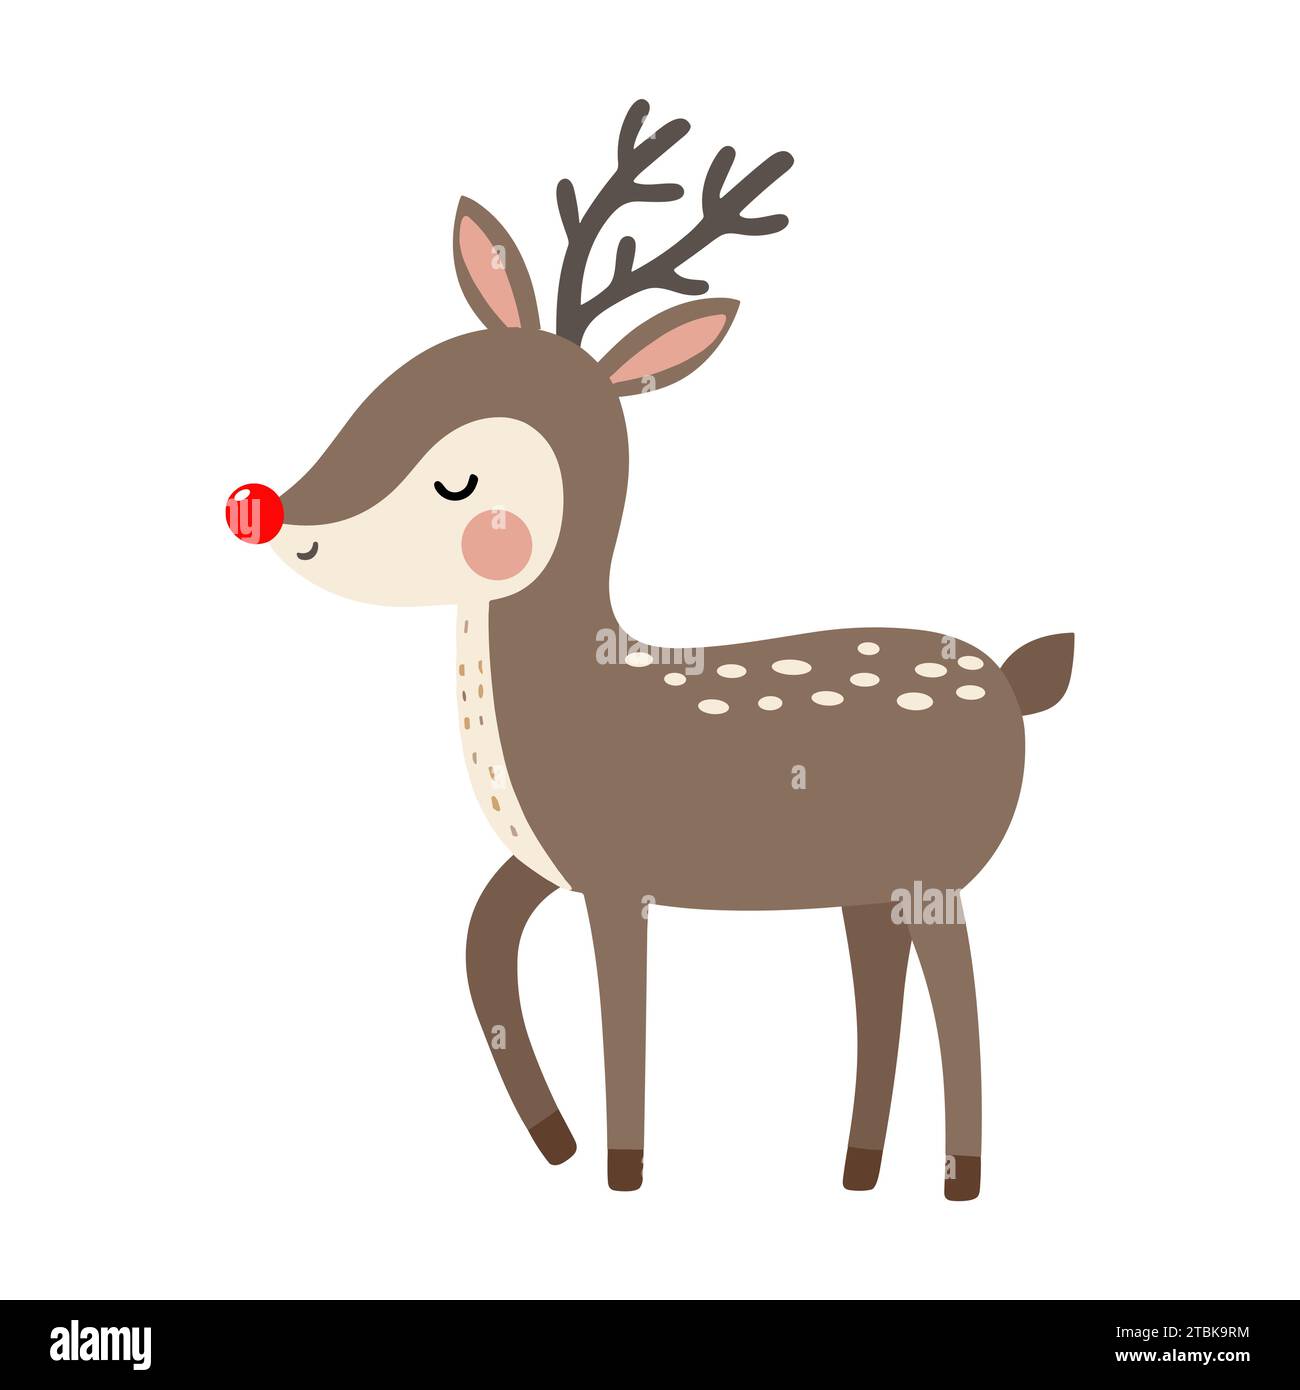 Rudolph red nosed reindeer illustration for kids. Christmas characters ...